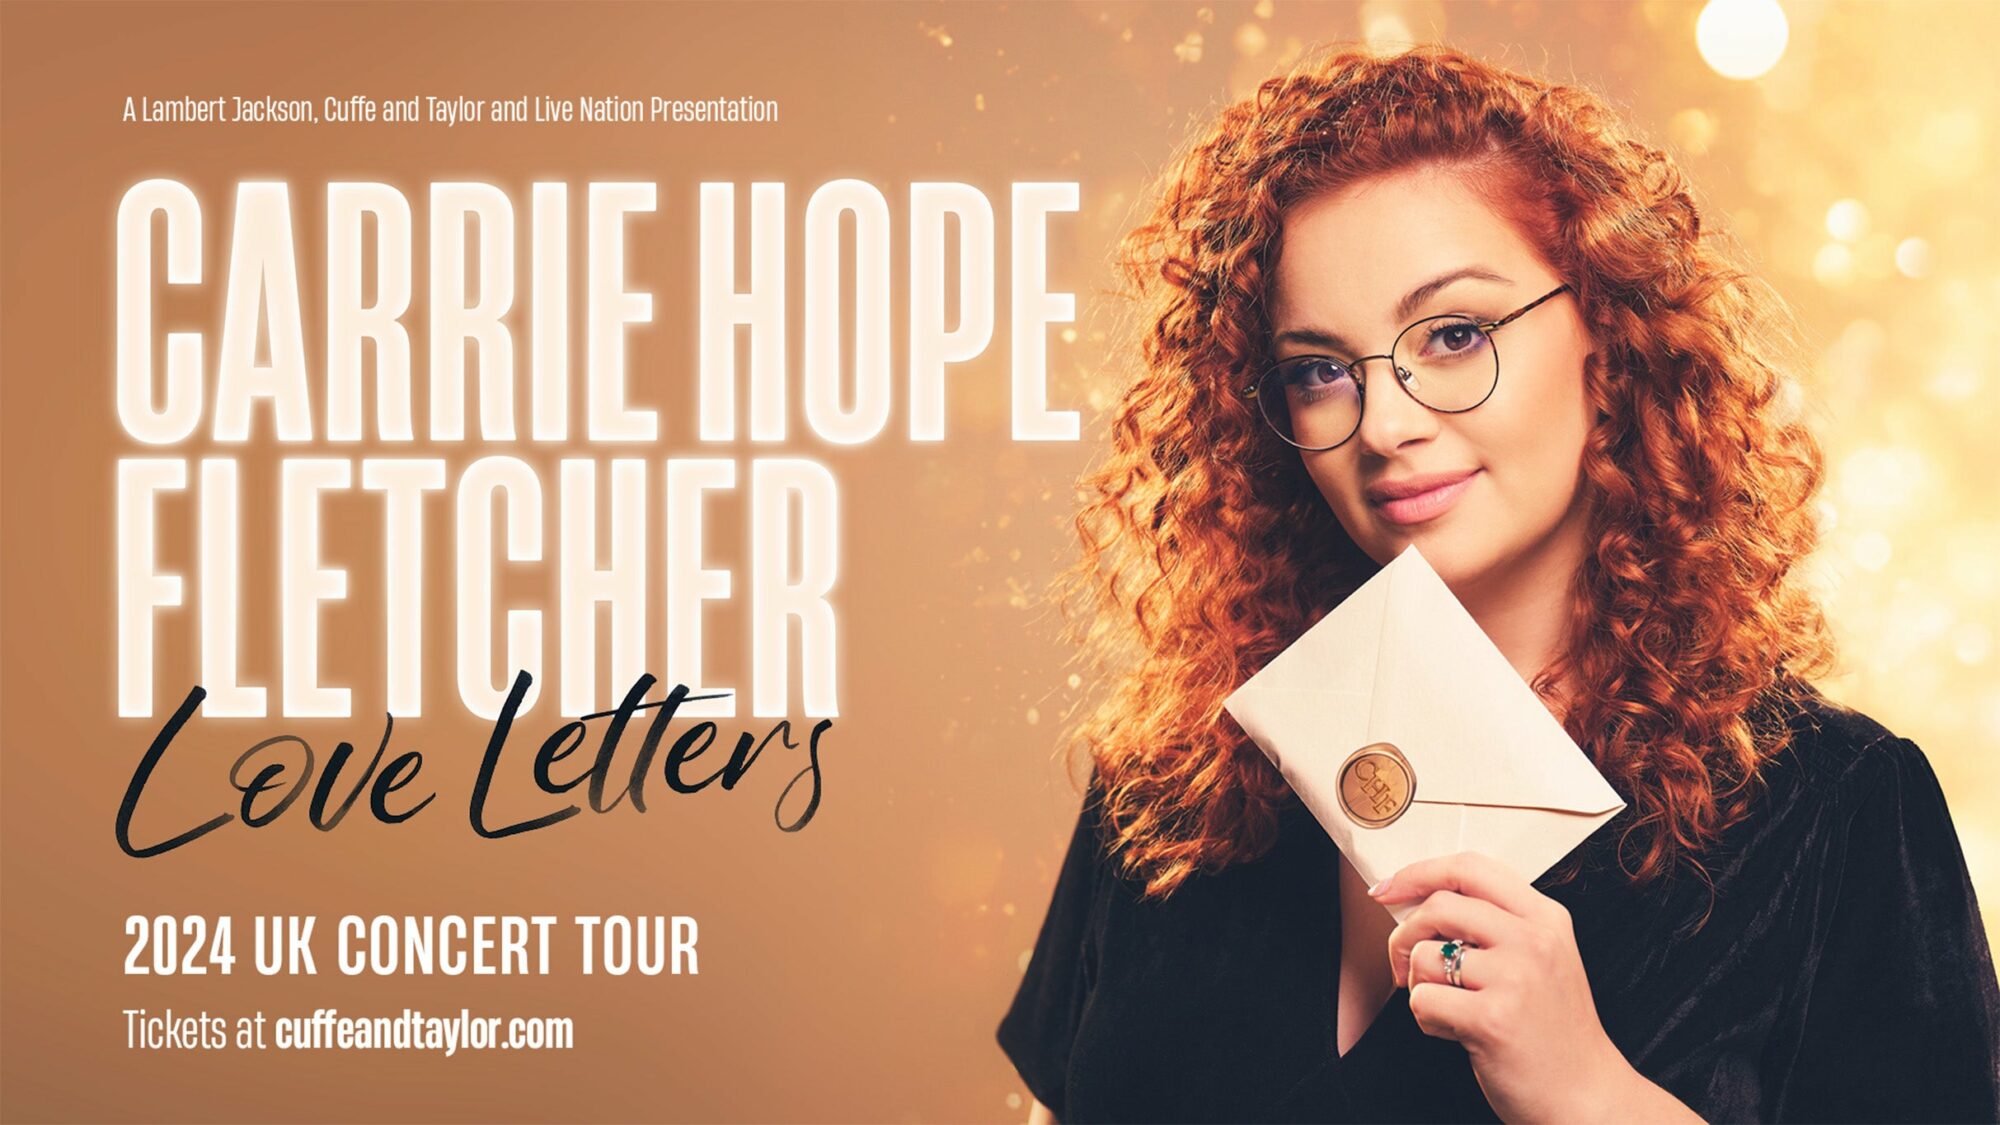 Image name Carrie Hope Fletcher Love Letters at York Barbican York the 1 image from the post Carrie Hope Fletcher: Love Letters at York Barbican, York in Yorkshire.com.